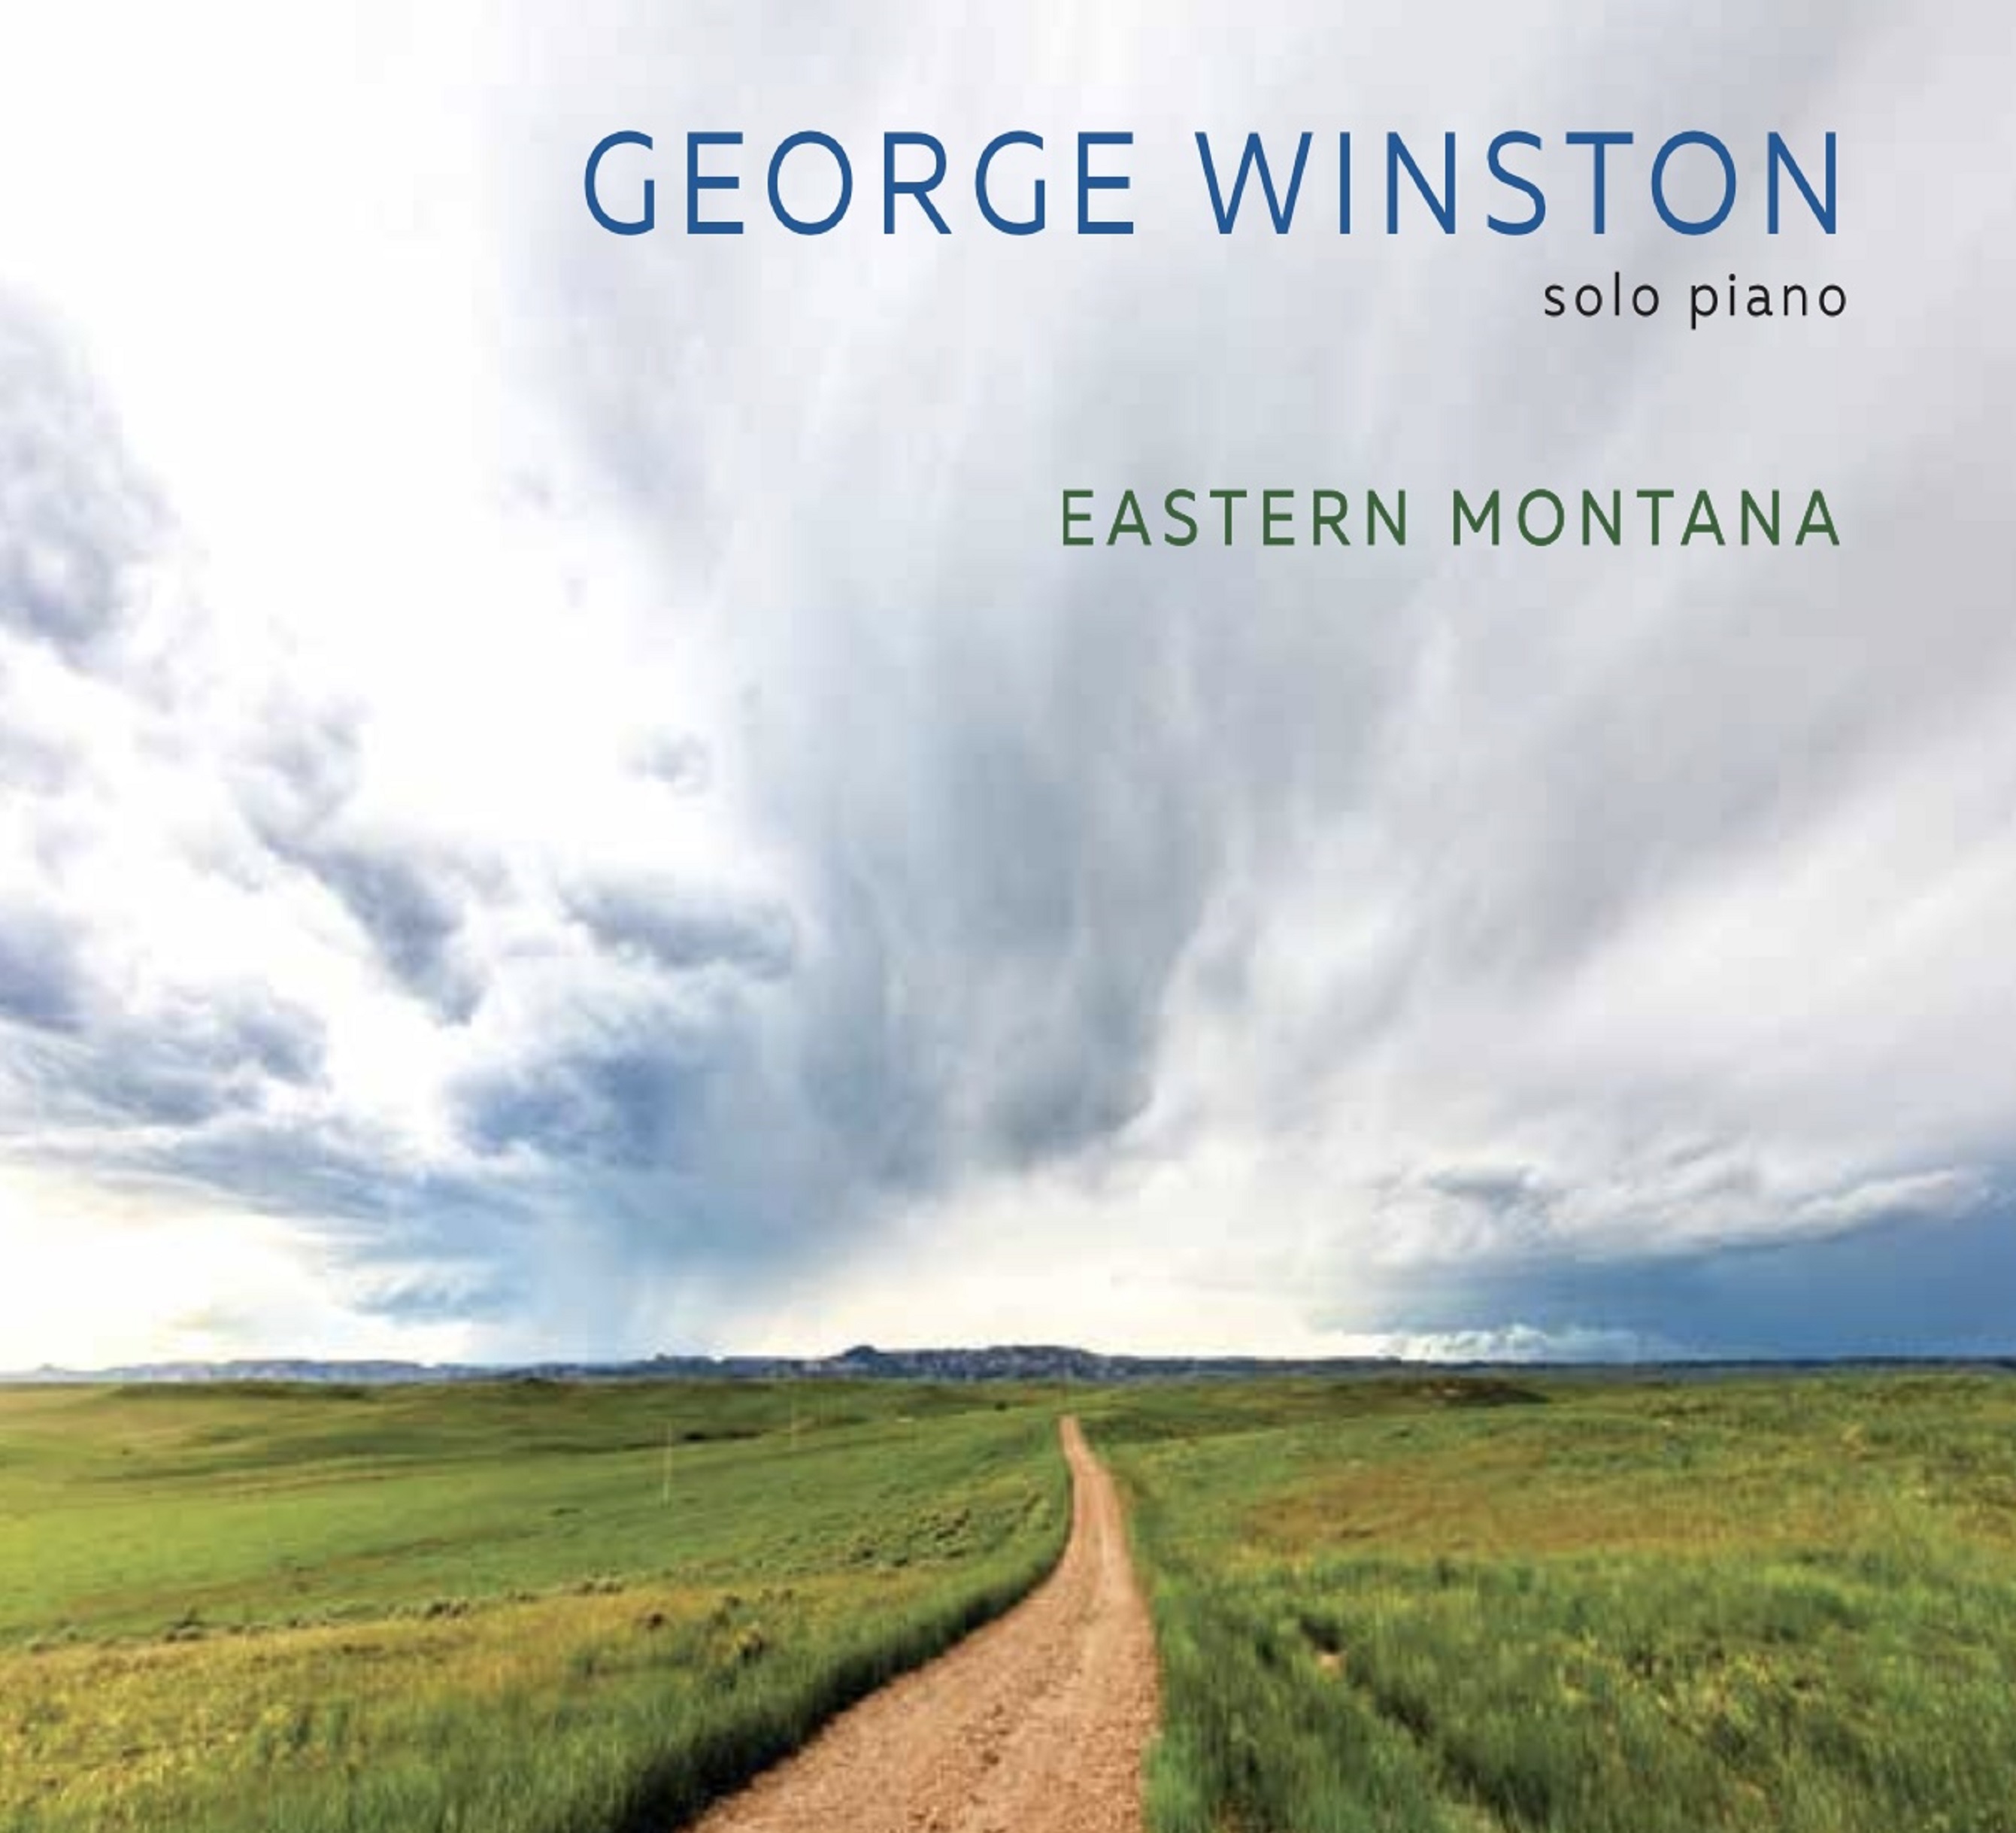 Posthumous Album "Eastern Montana" By Pianist George Winston Set For Release on August 30th By Dancing Cat Records